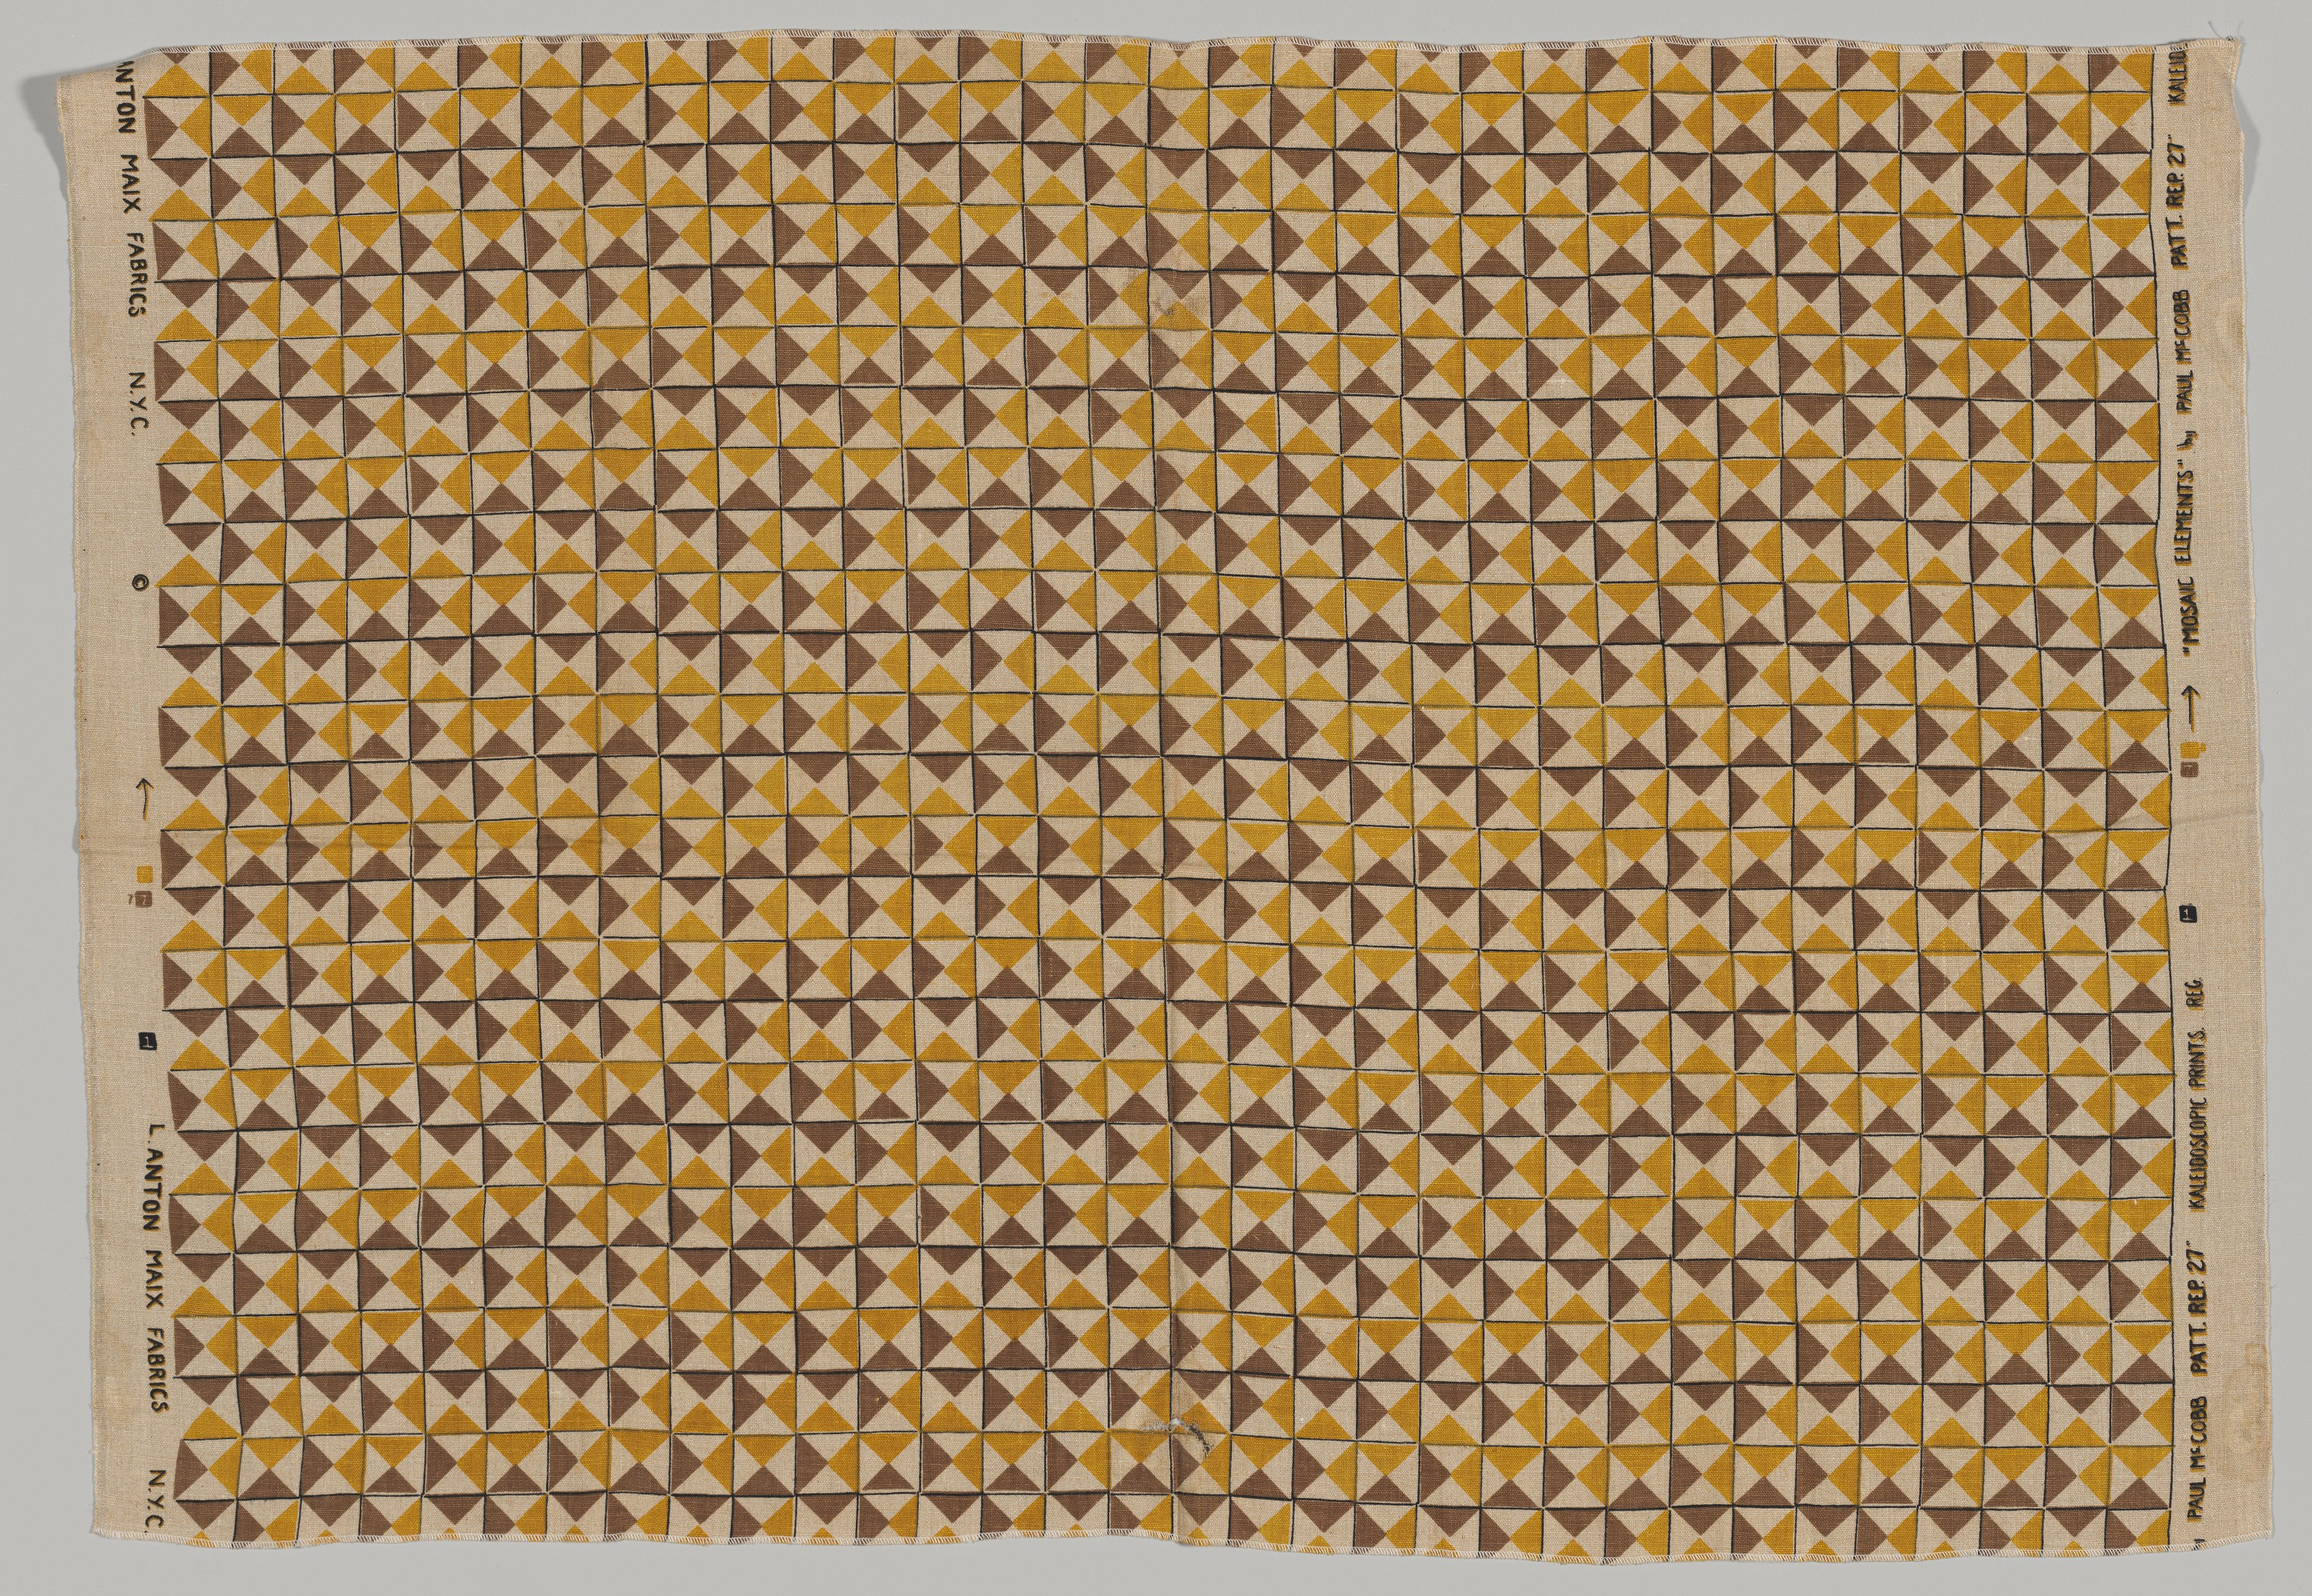 Mosaic Elements (mustard, brown triangles)